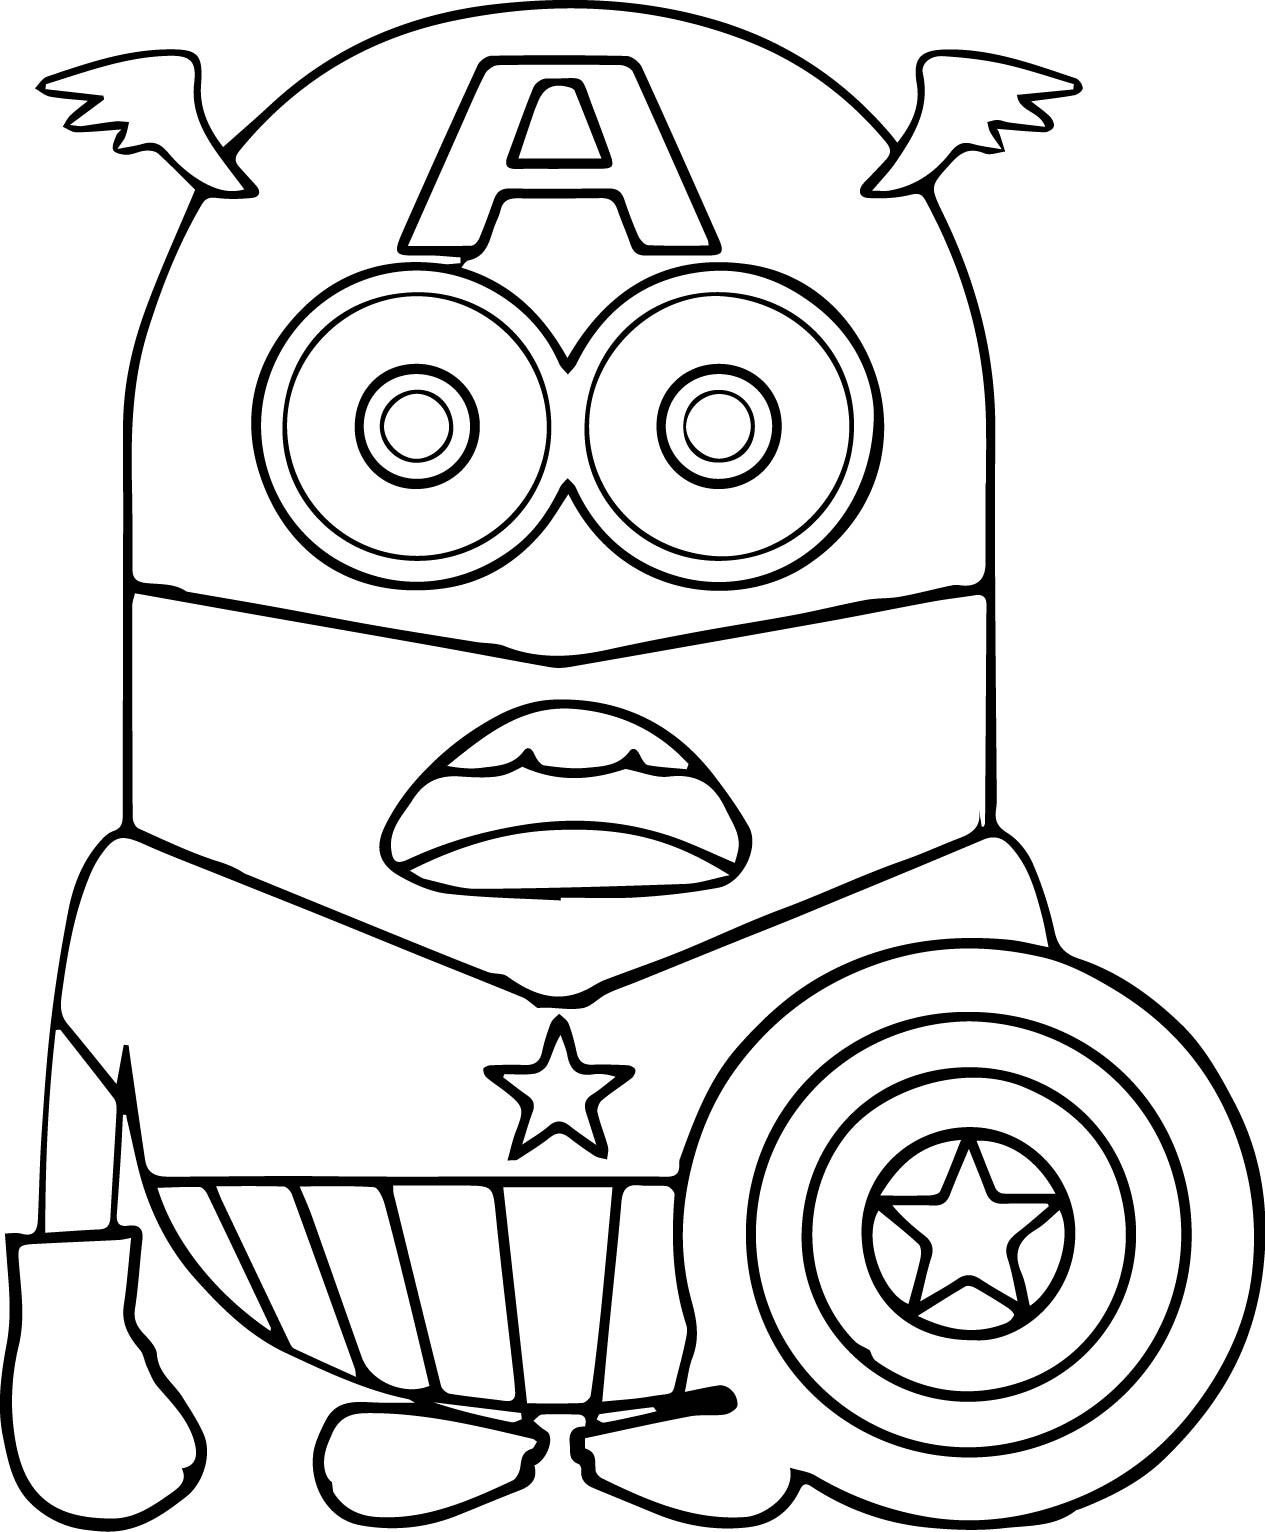 Download Minion Coloring Pages Halloween